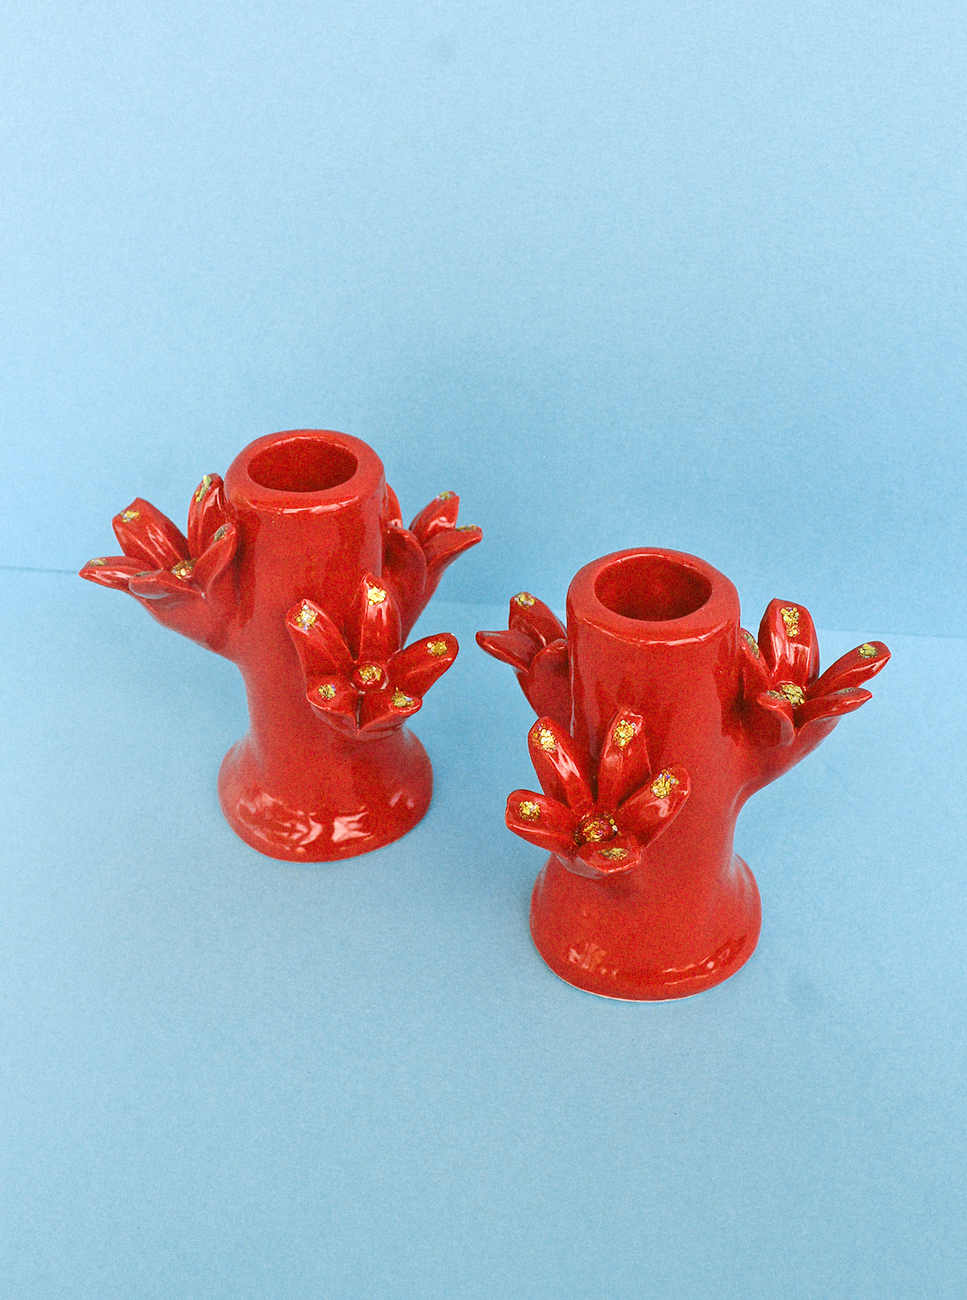 Two Flores Candleholder Set - Rojo from Casa Veronica, shaped like blooming flowers with petals, on a blue background.